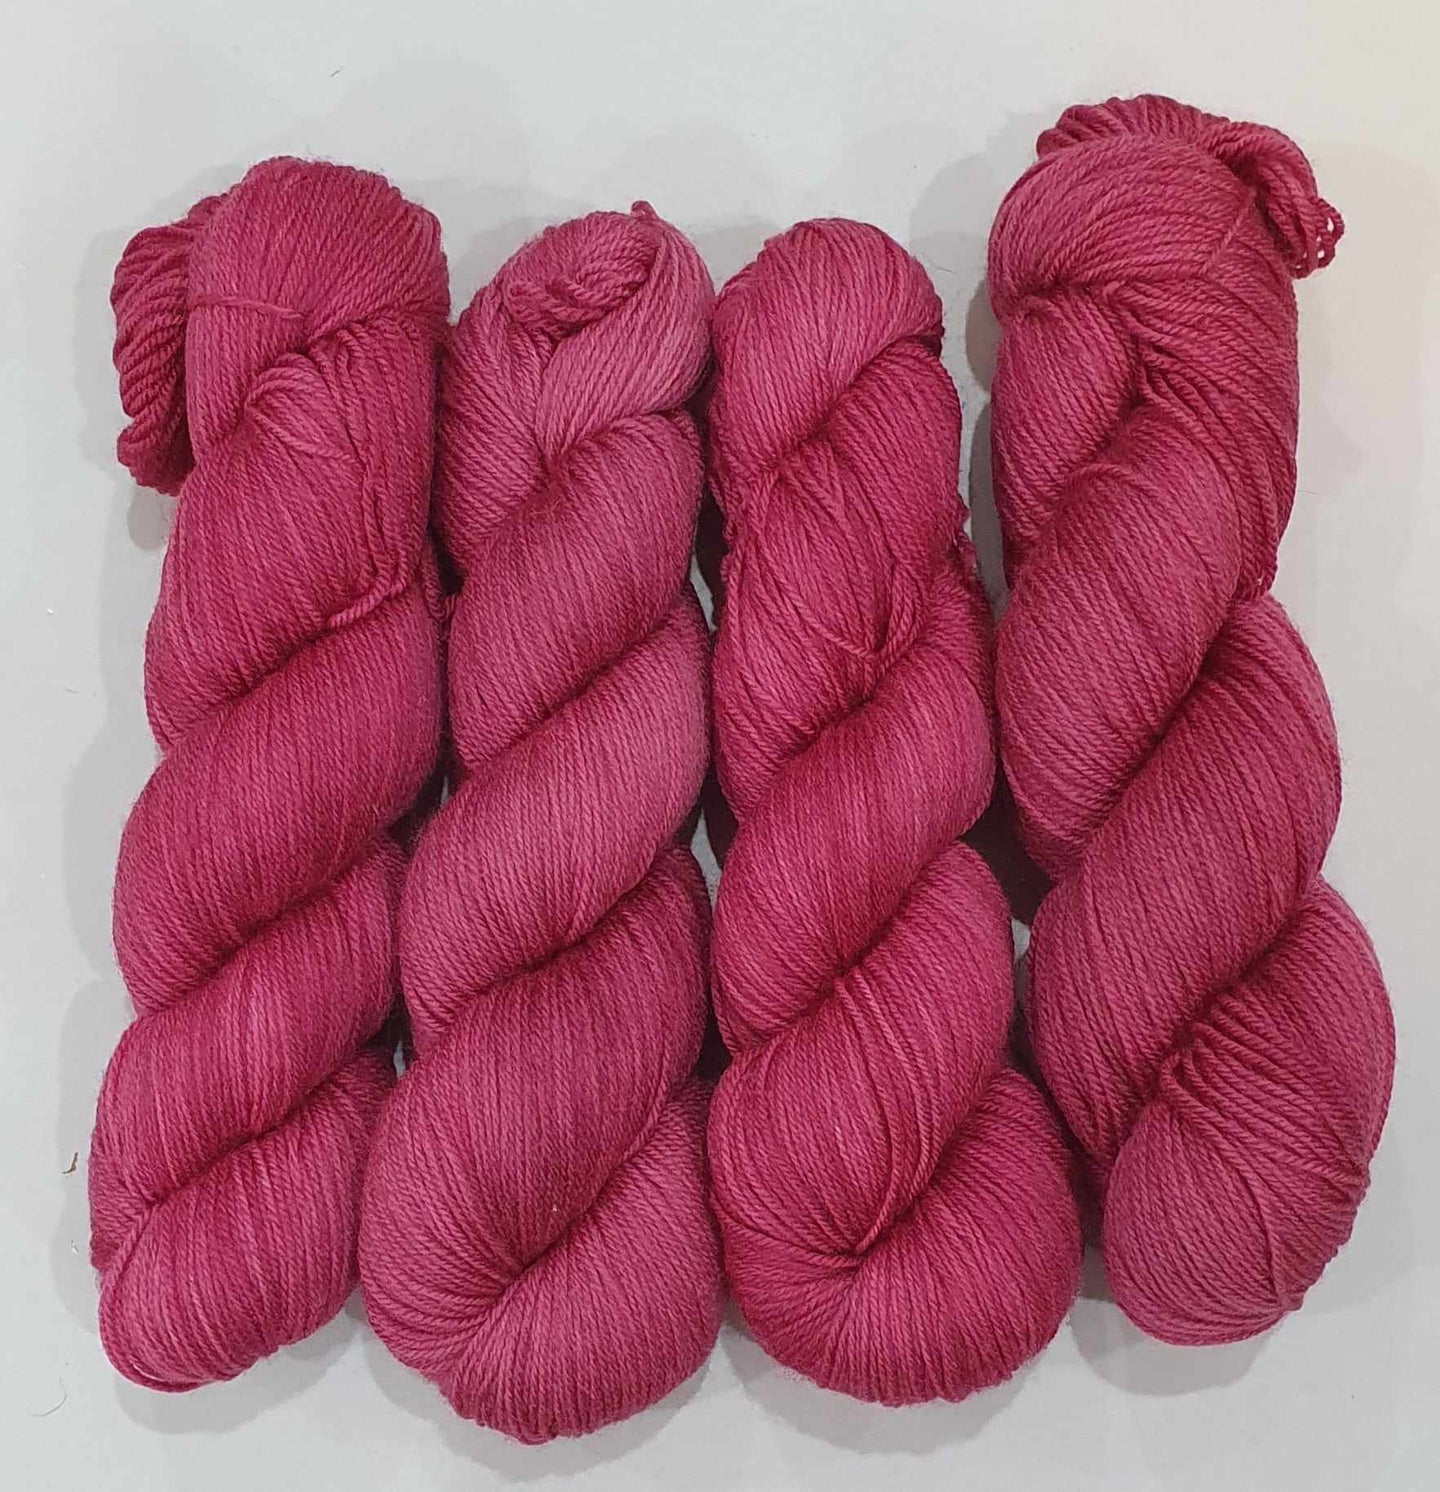 Blush (Fledgling 4ply Sock) (Available as Dyed To Order)